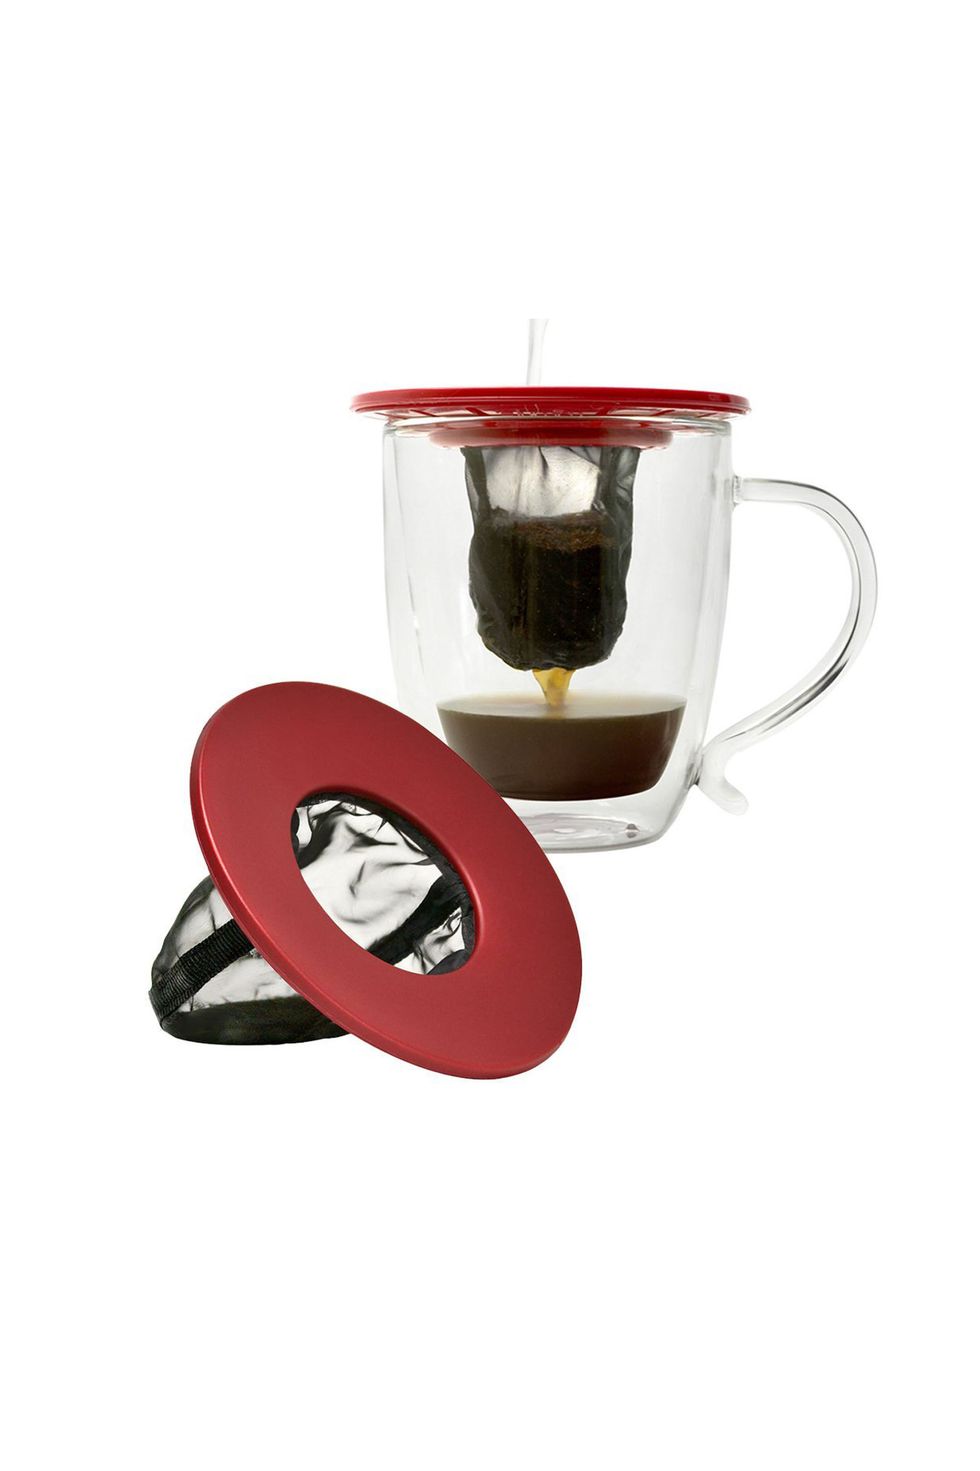 Primula Espresso Coffee Maker 3 Cup Portable Stove Top Backpacking